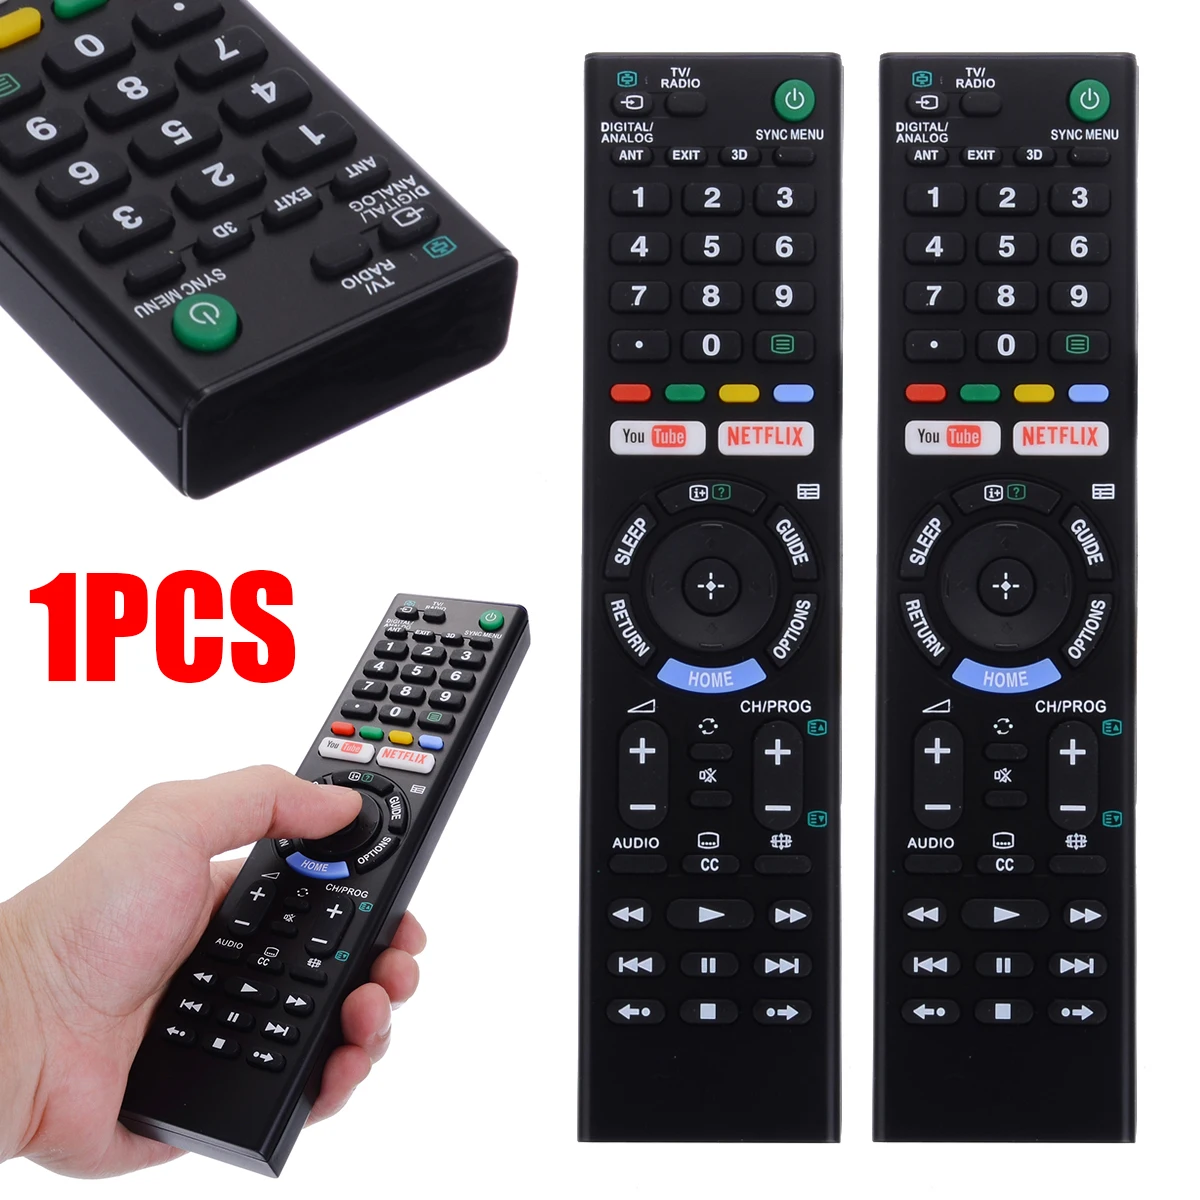 

Replacement electronic home theater RMT-TX300P Remote Control For Son RMT-TX300E RMT-TX300U KD-55X7000E Smart LCD TV Controller